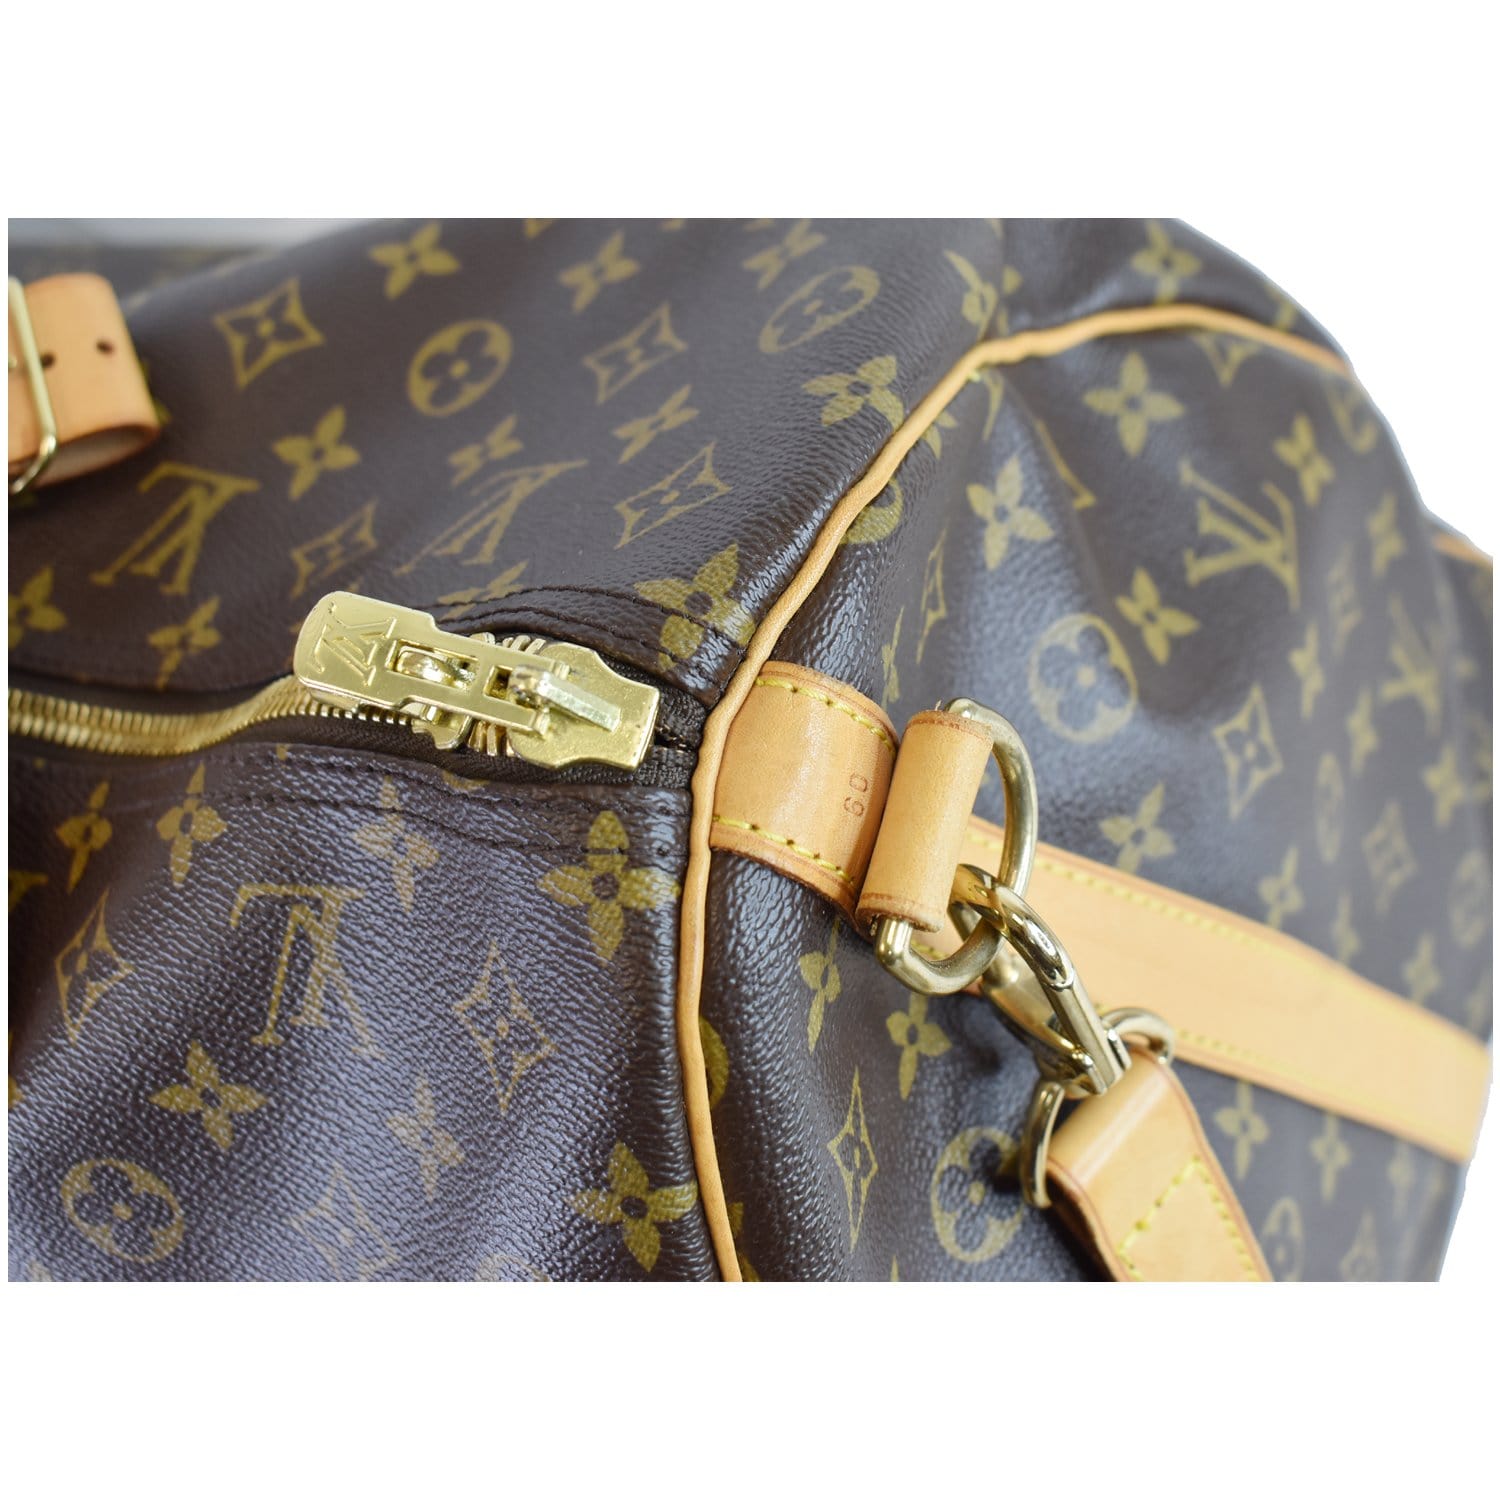 Keepall 60 Monogram Canvas Bandouliere (Authentic Pre-Owned) – The Lady Bag